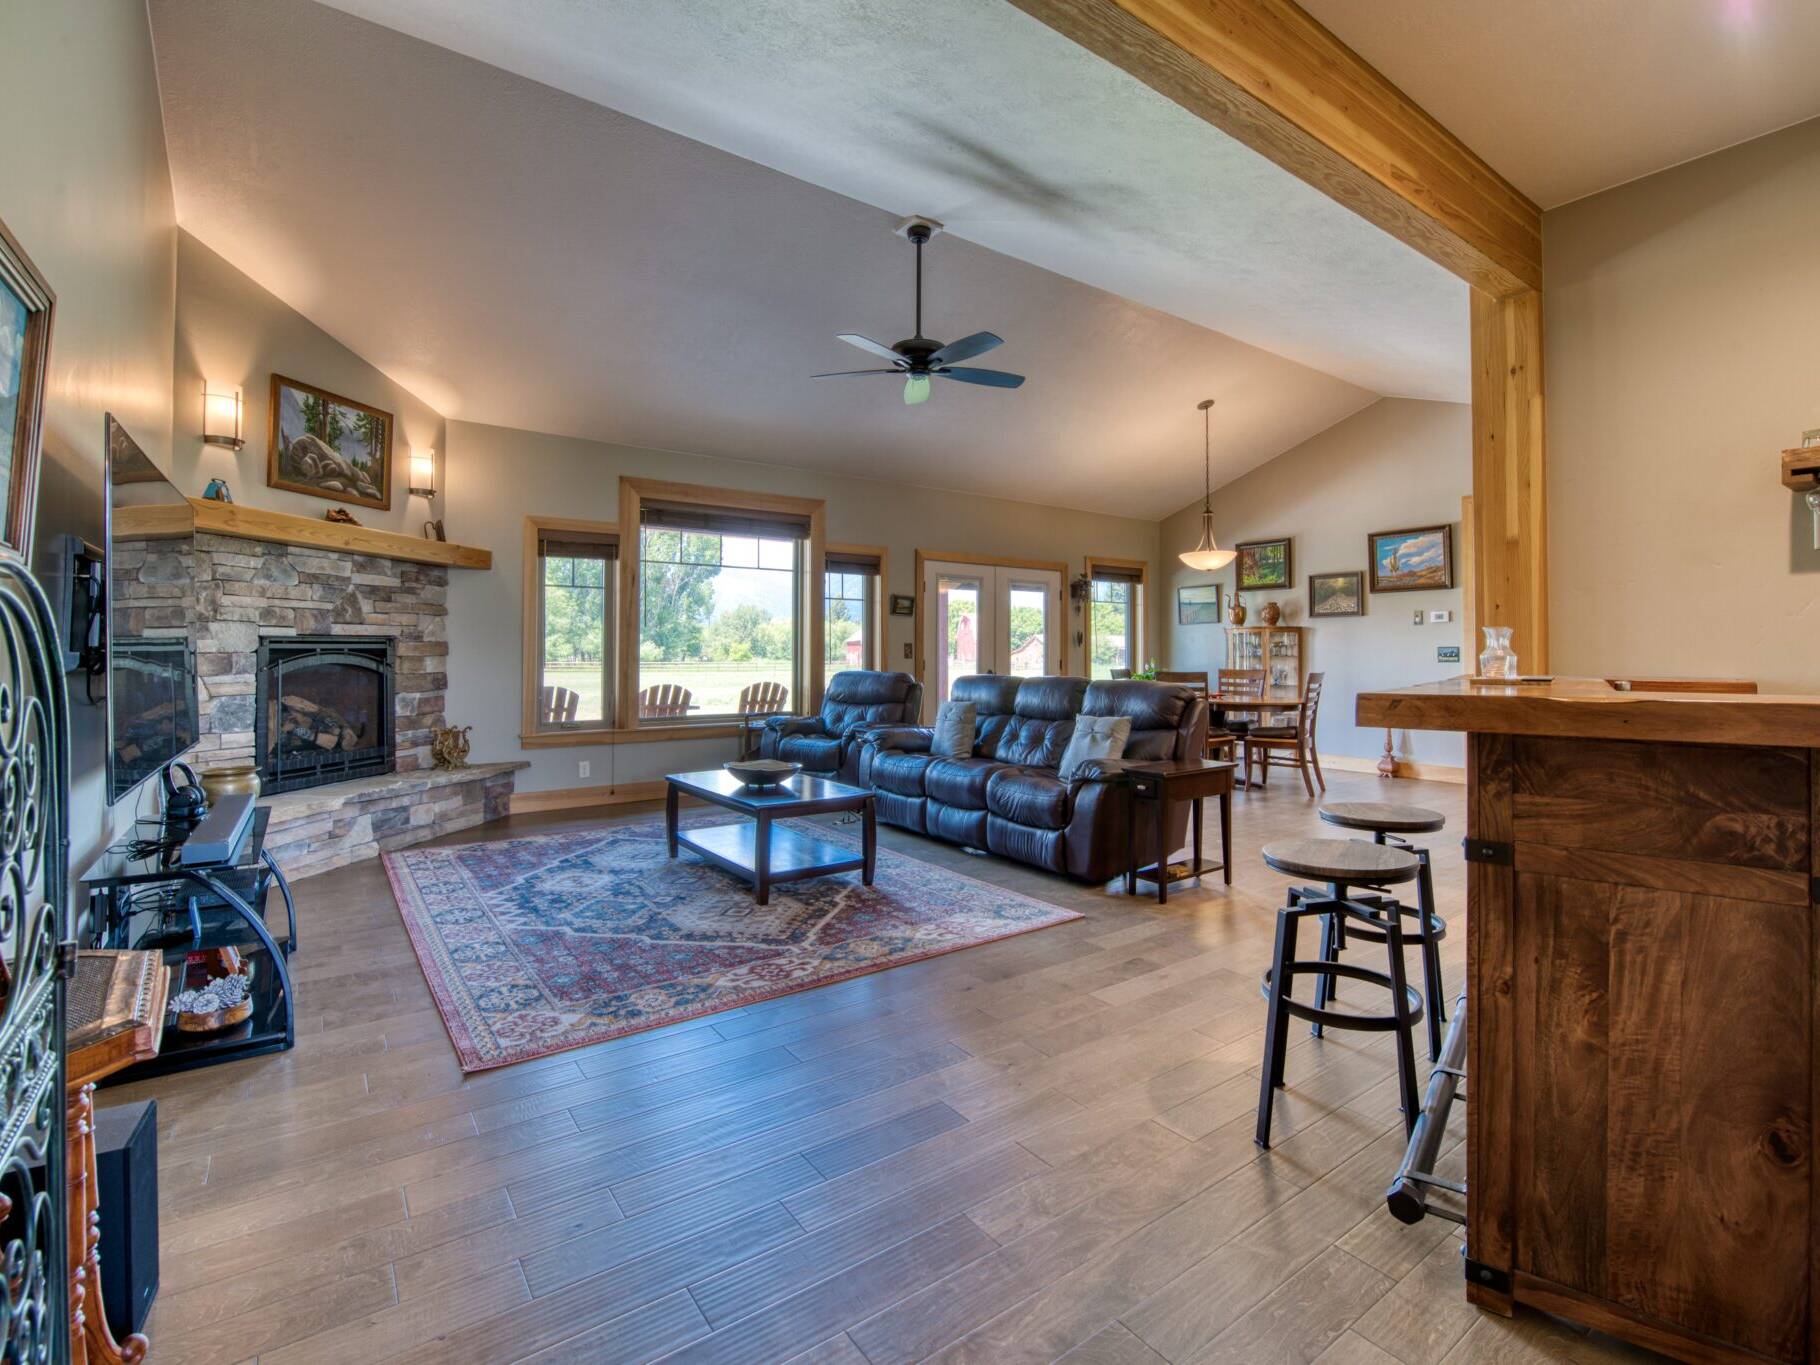 Living room with wood flooring, gas fireplace and wood trim in a custom home in Hamilton, MT